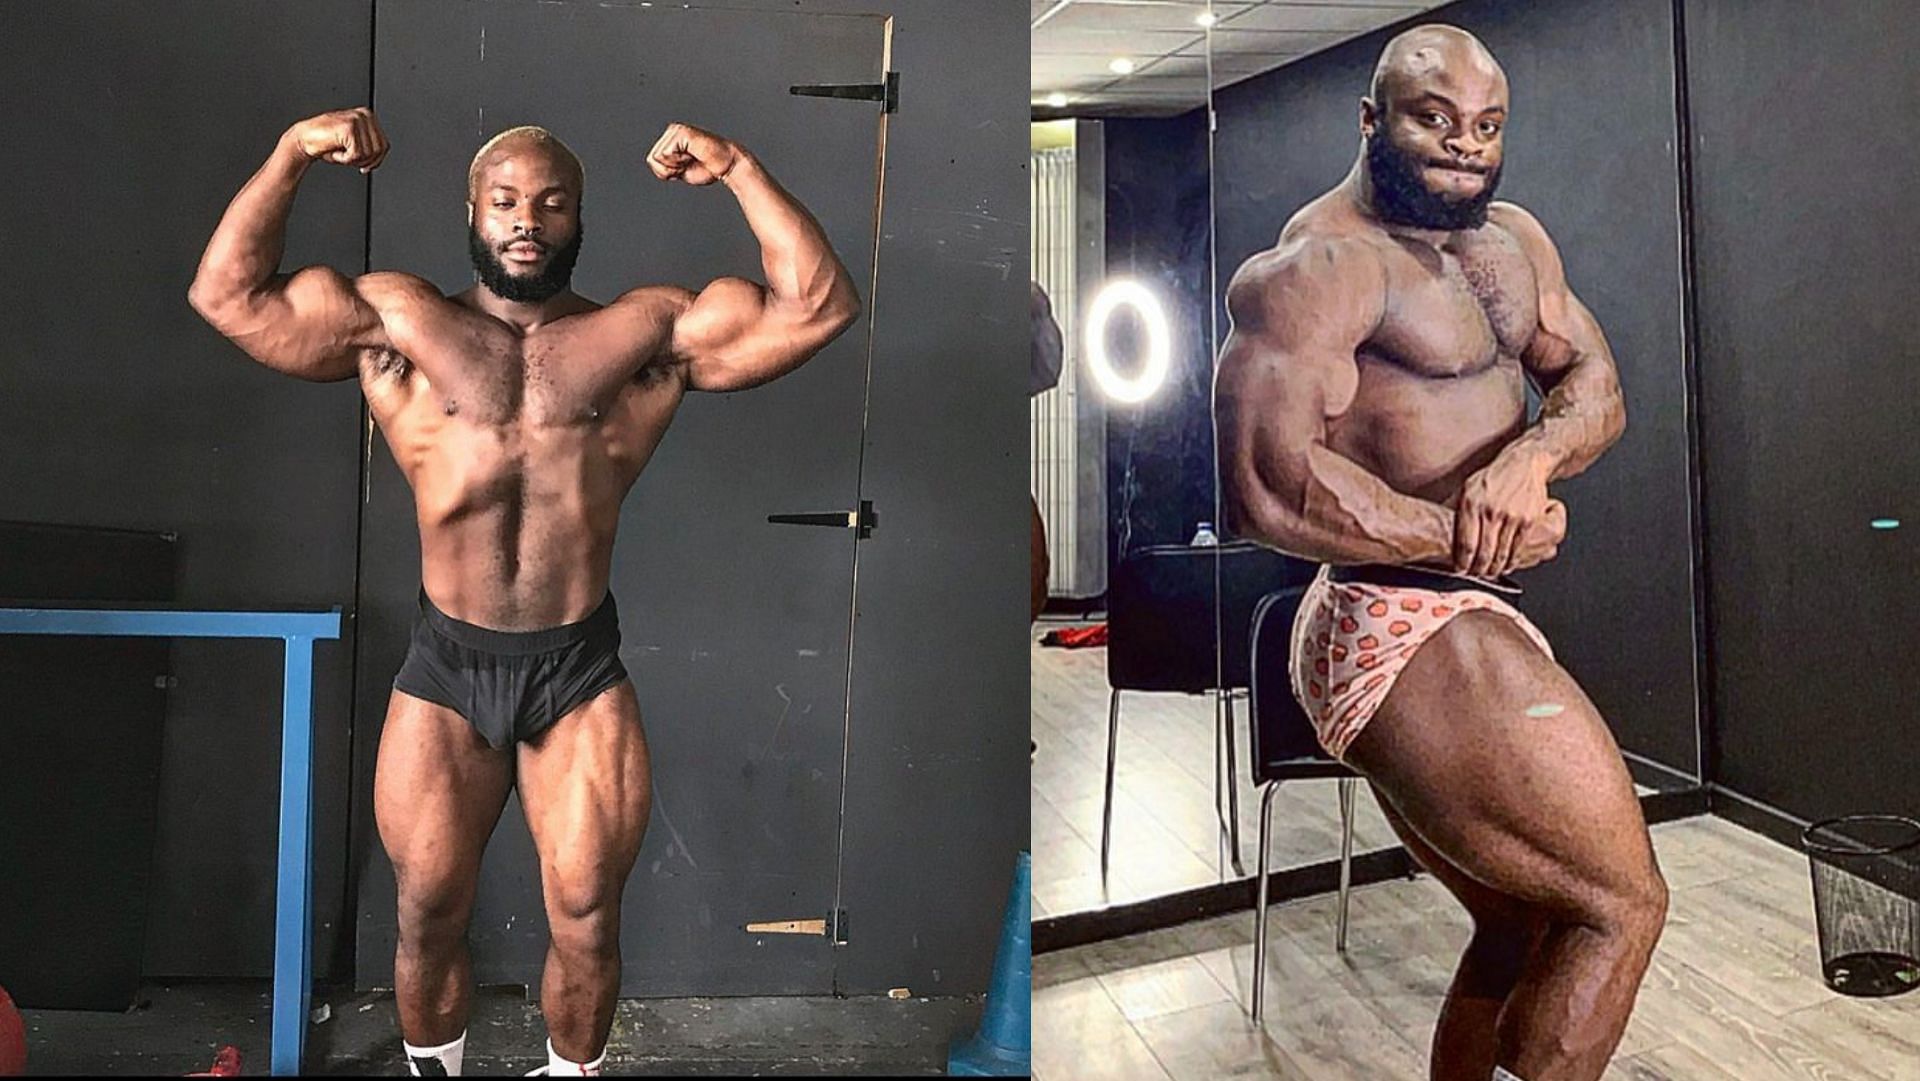 Looks Old Enough to Be My Dad” - 23-Year-Old Bodybuilder Shocks